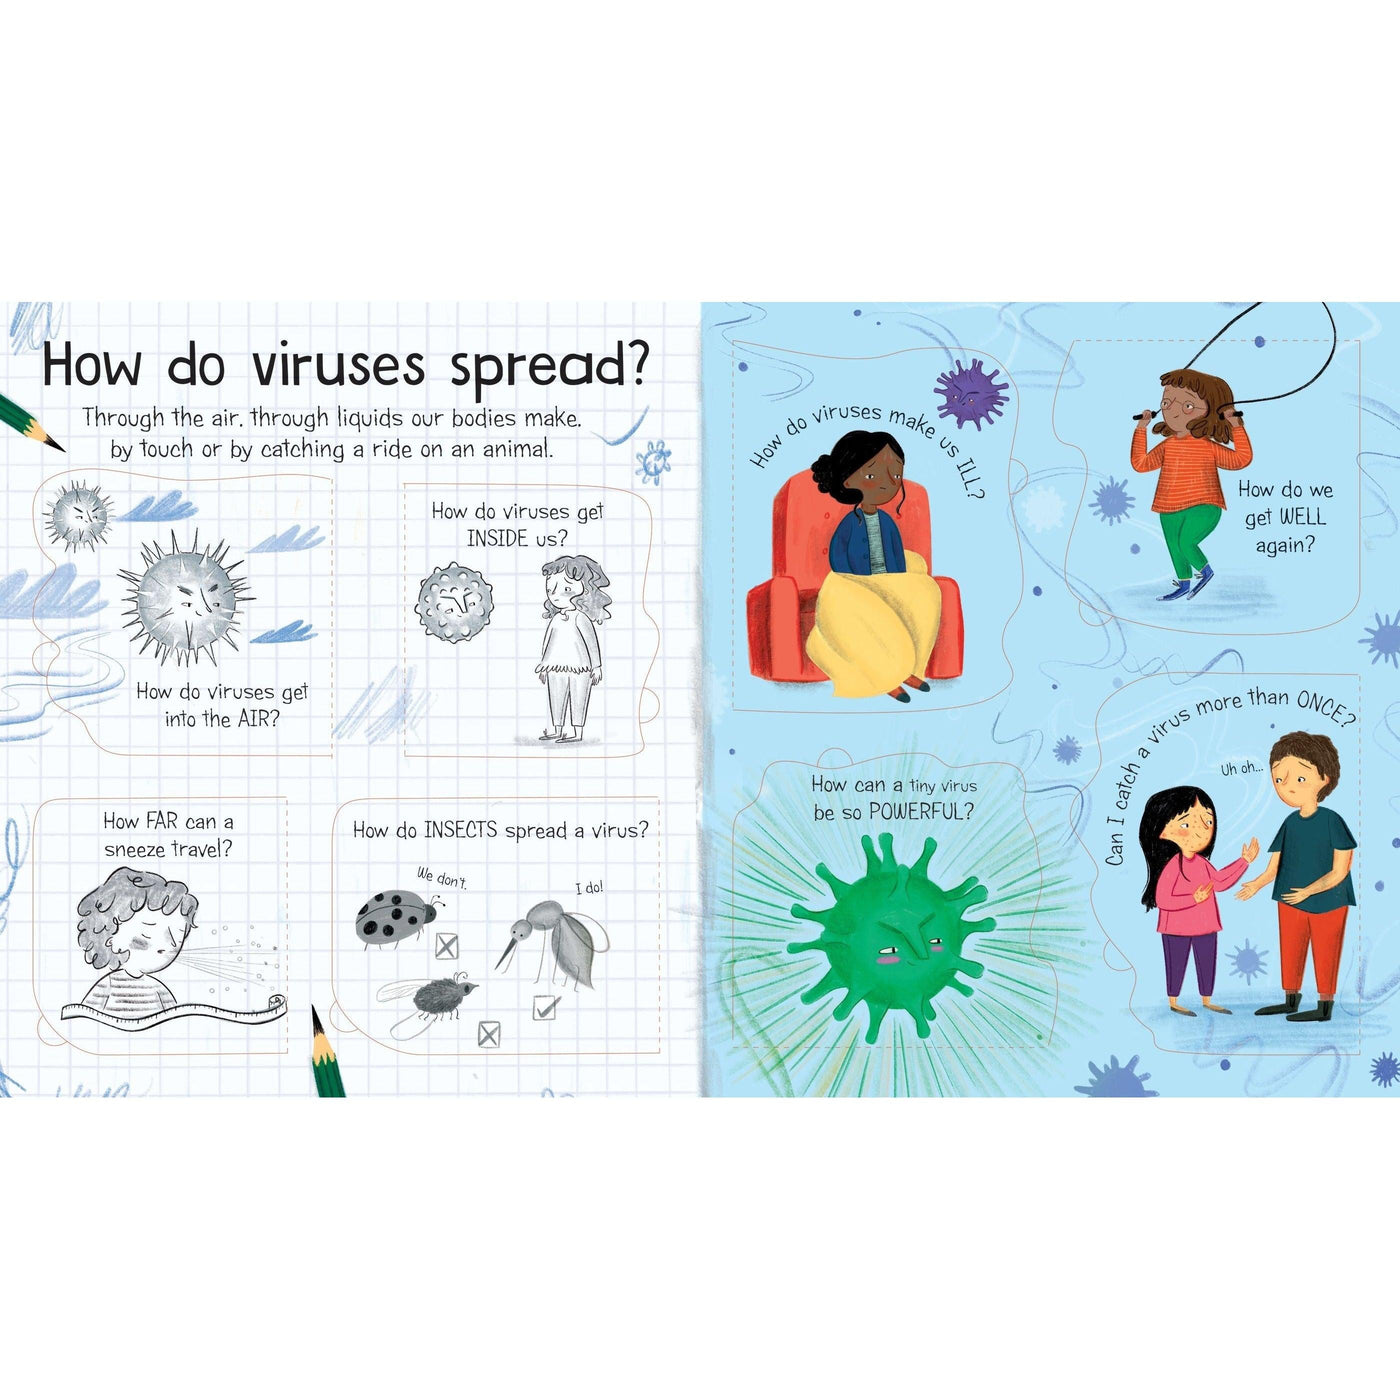 First Questions and Answers: What is a Virus?